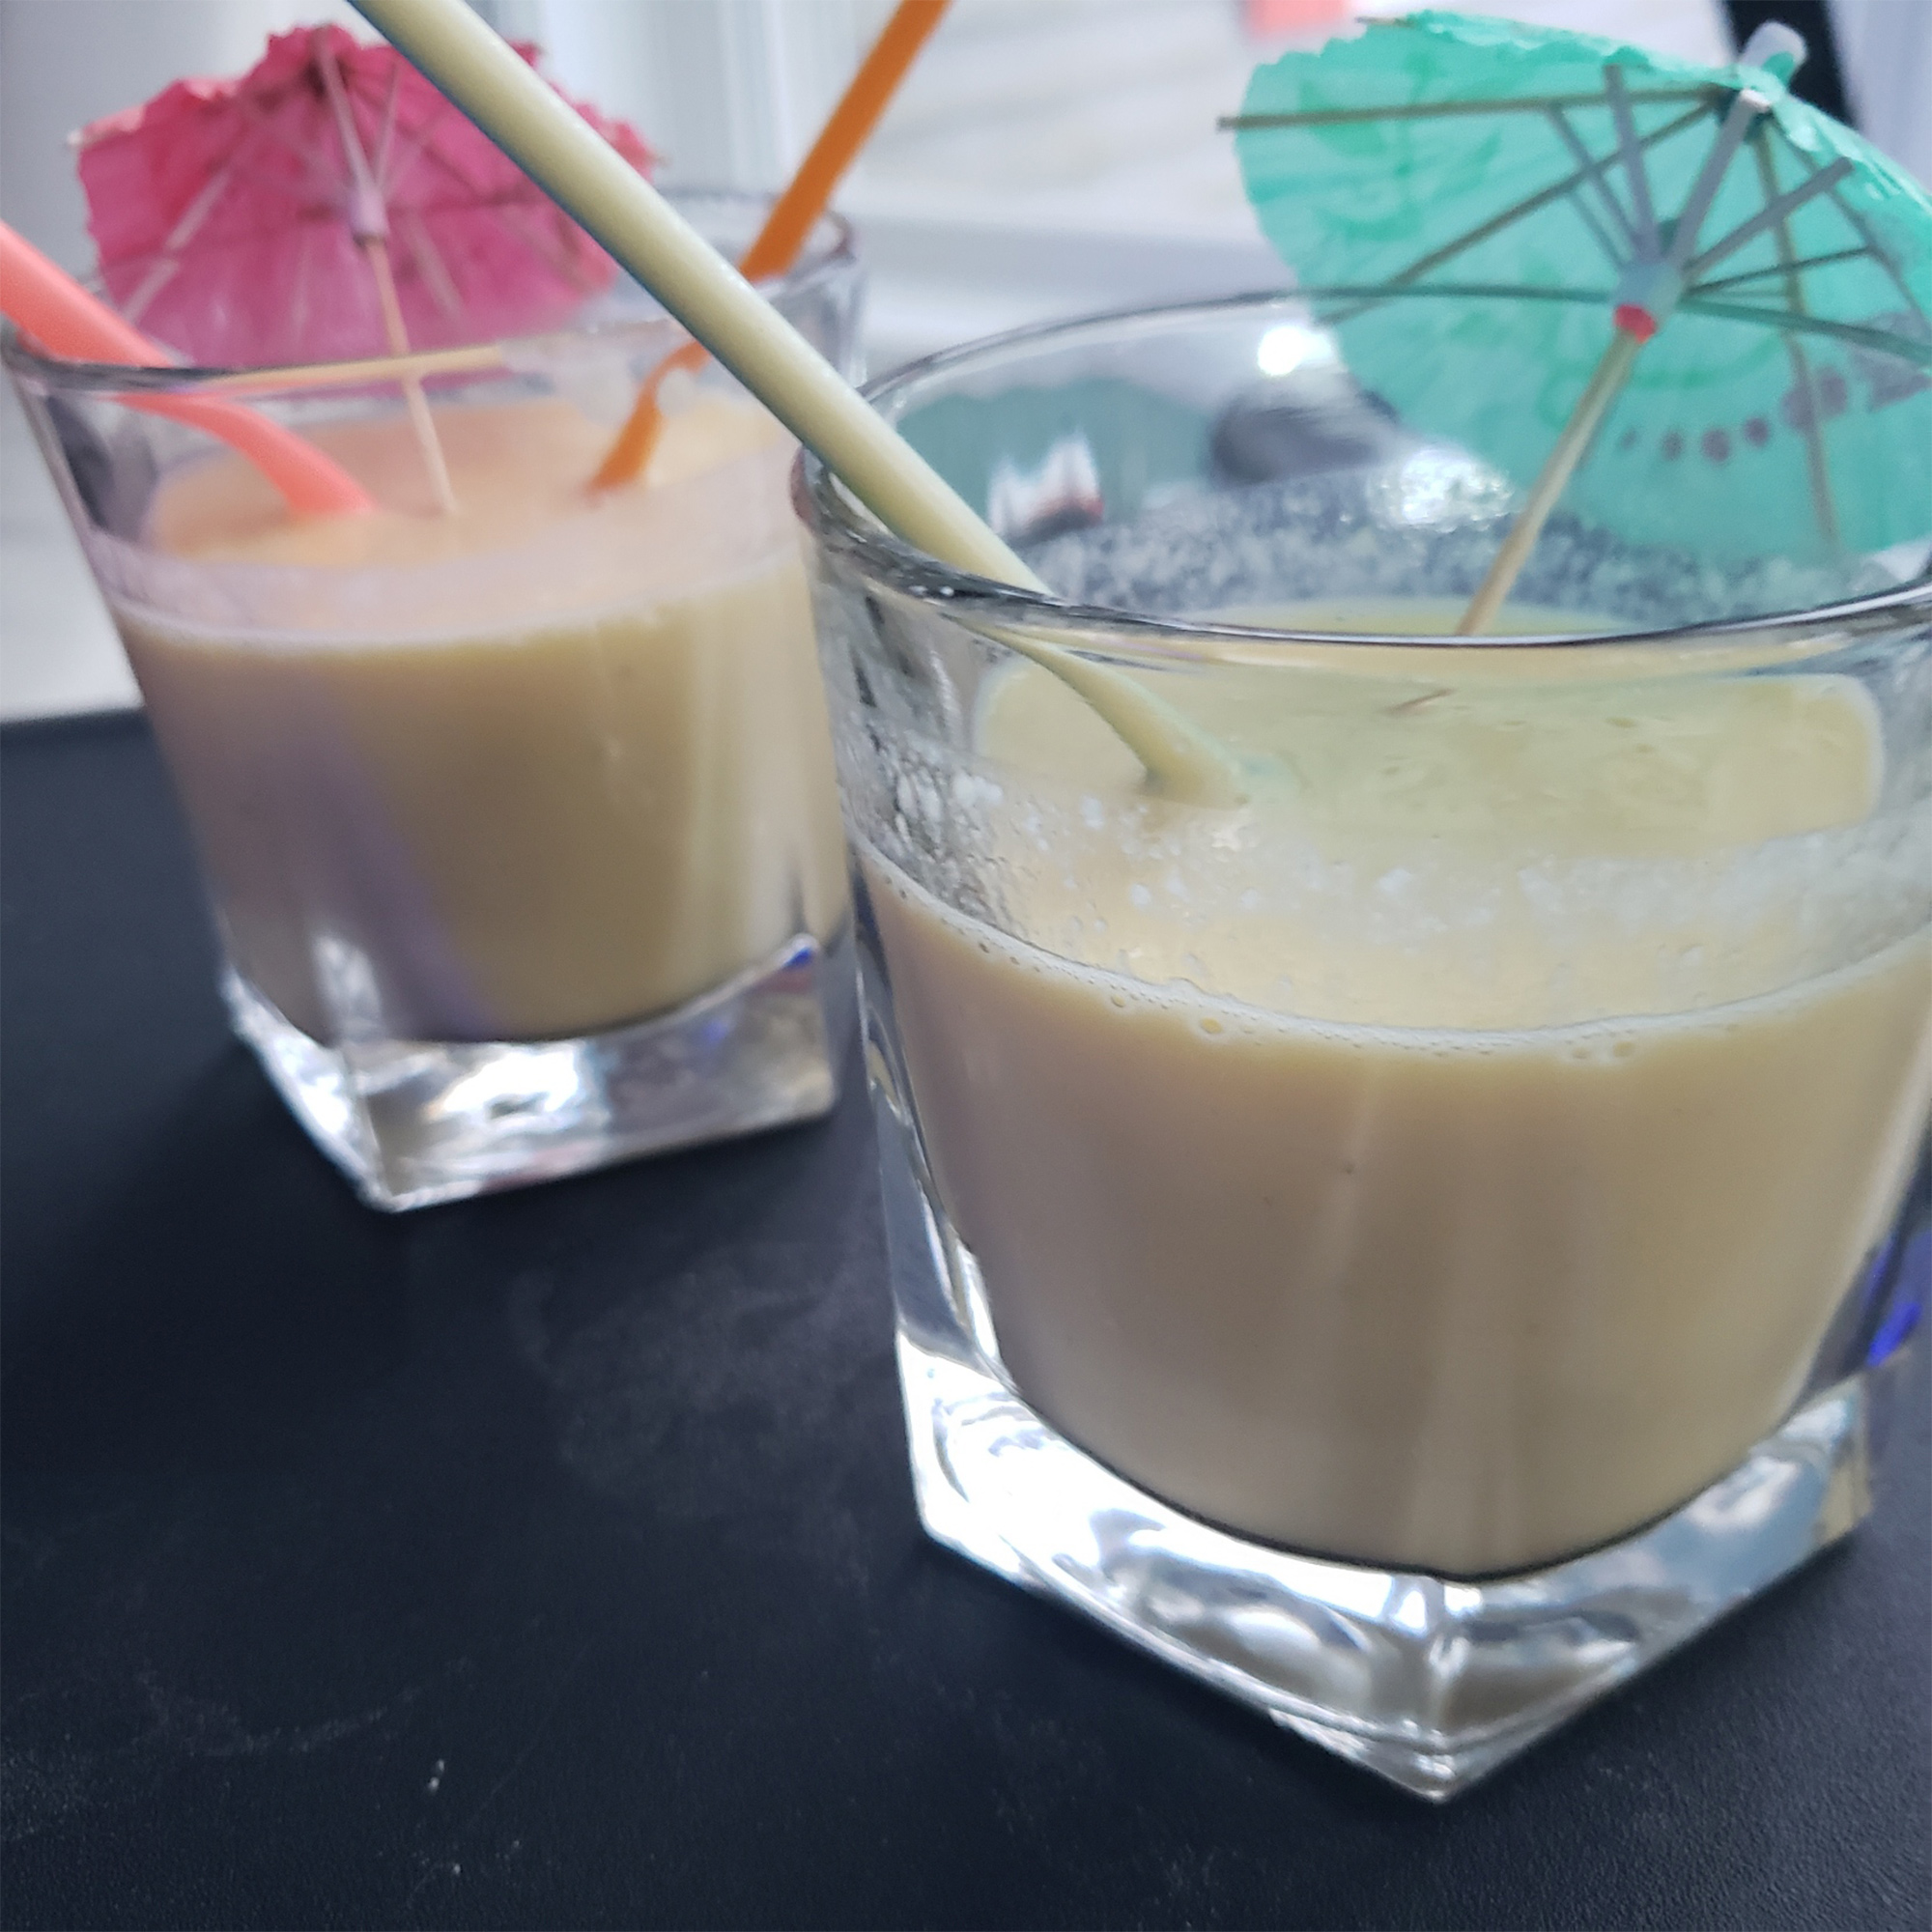 Banana Mango Smoothies in glasses with straws and umbrellas